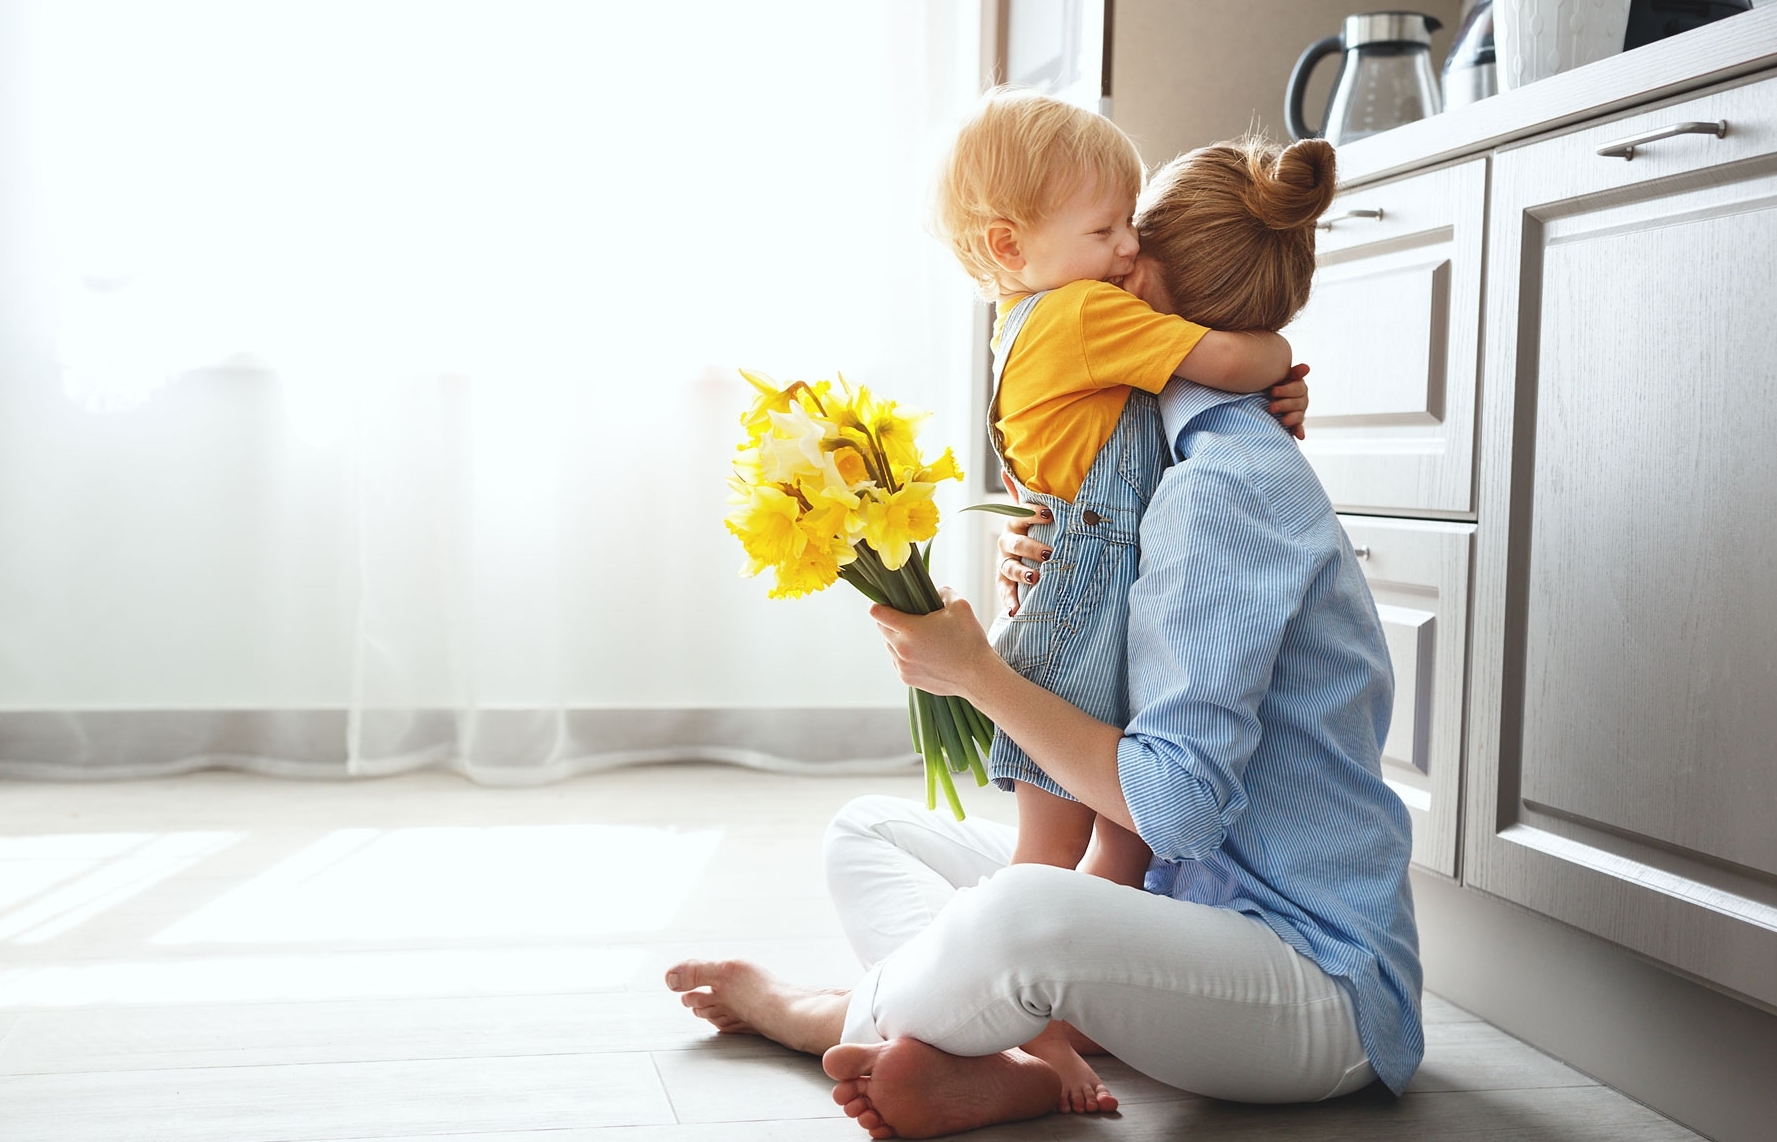 Mother's Day 2020: 23 reasons to be thankful for your mom